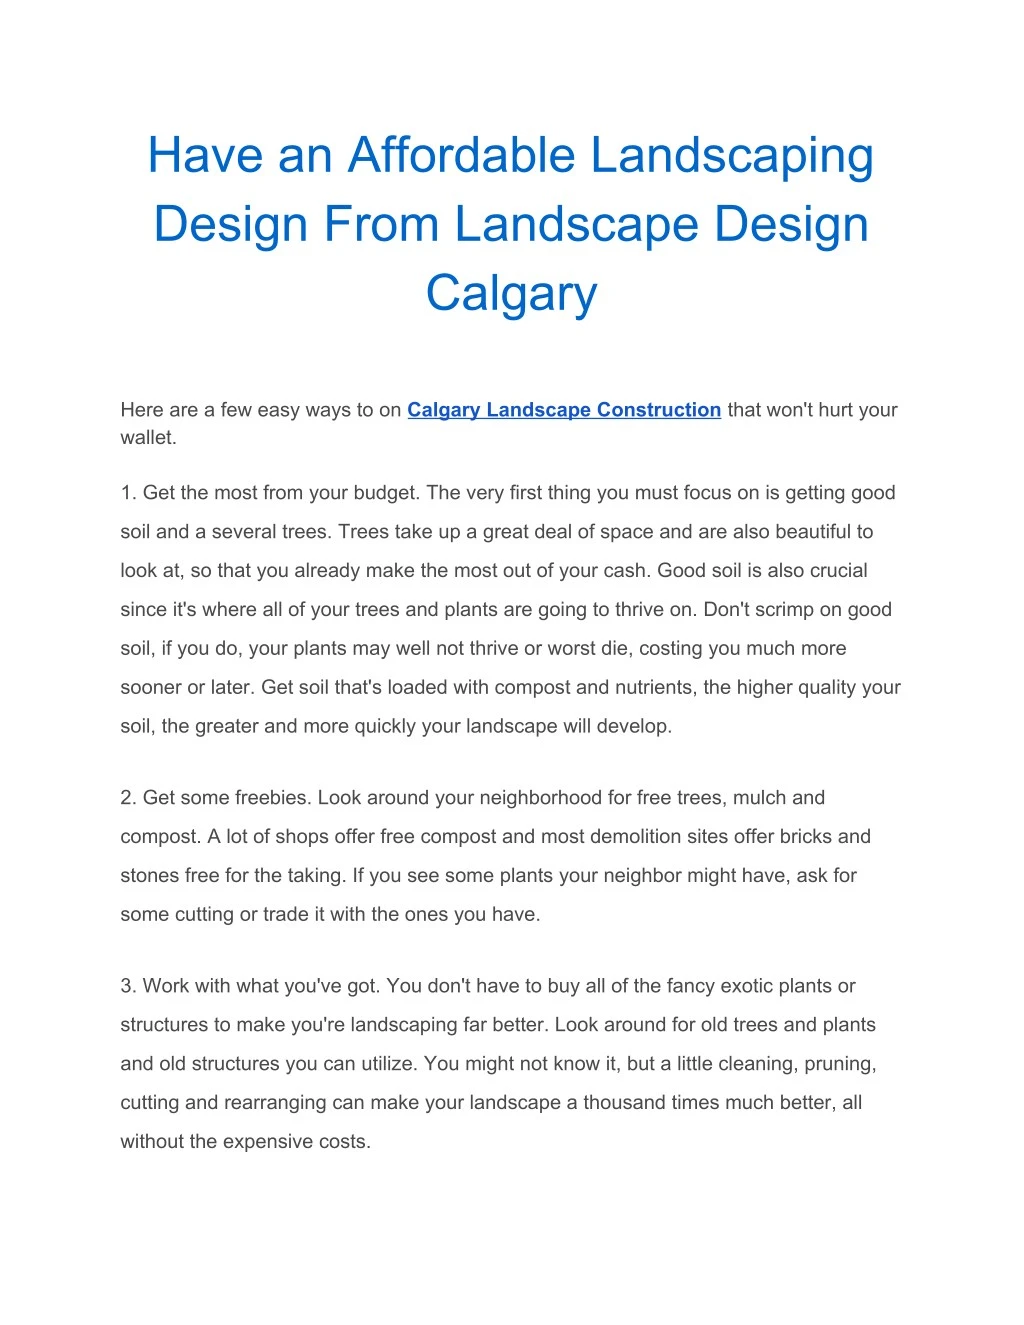 have an affordable landscaping design from